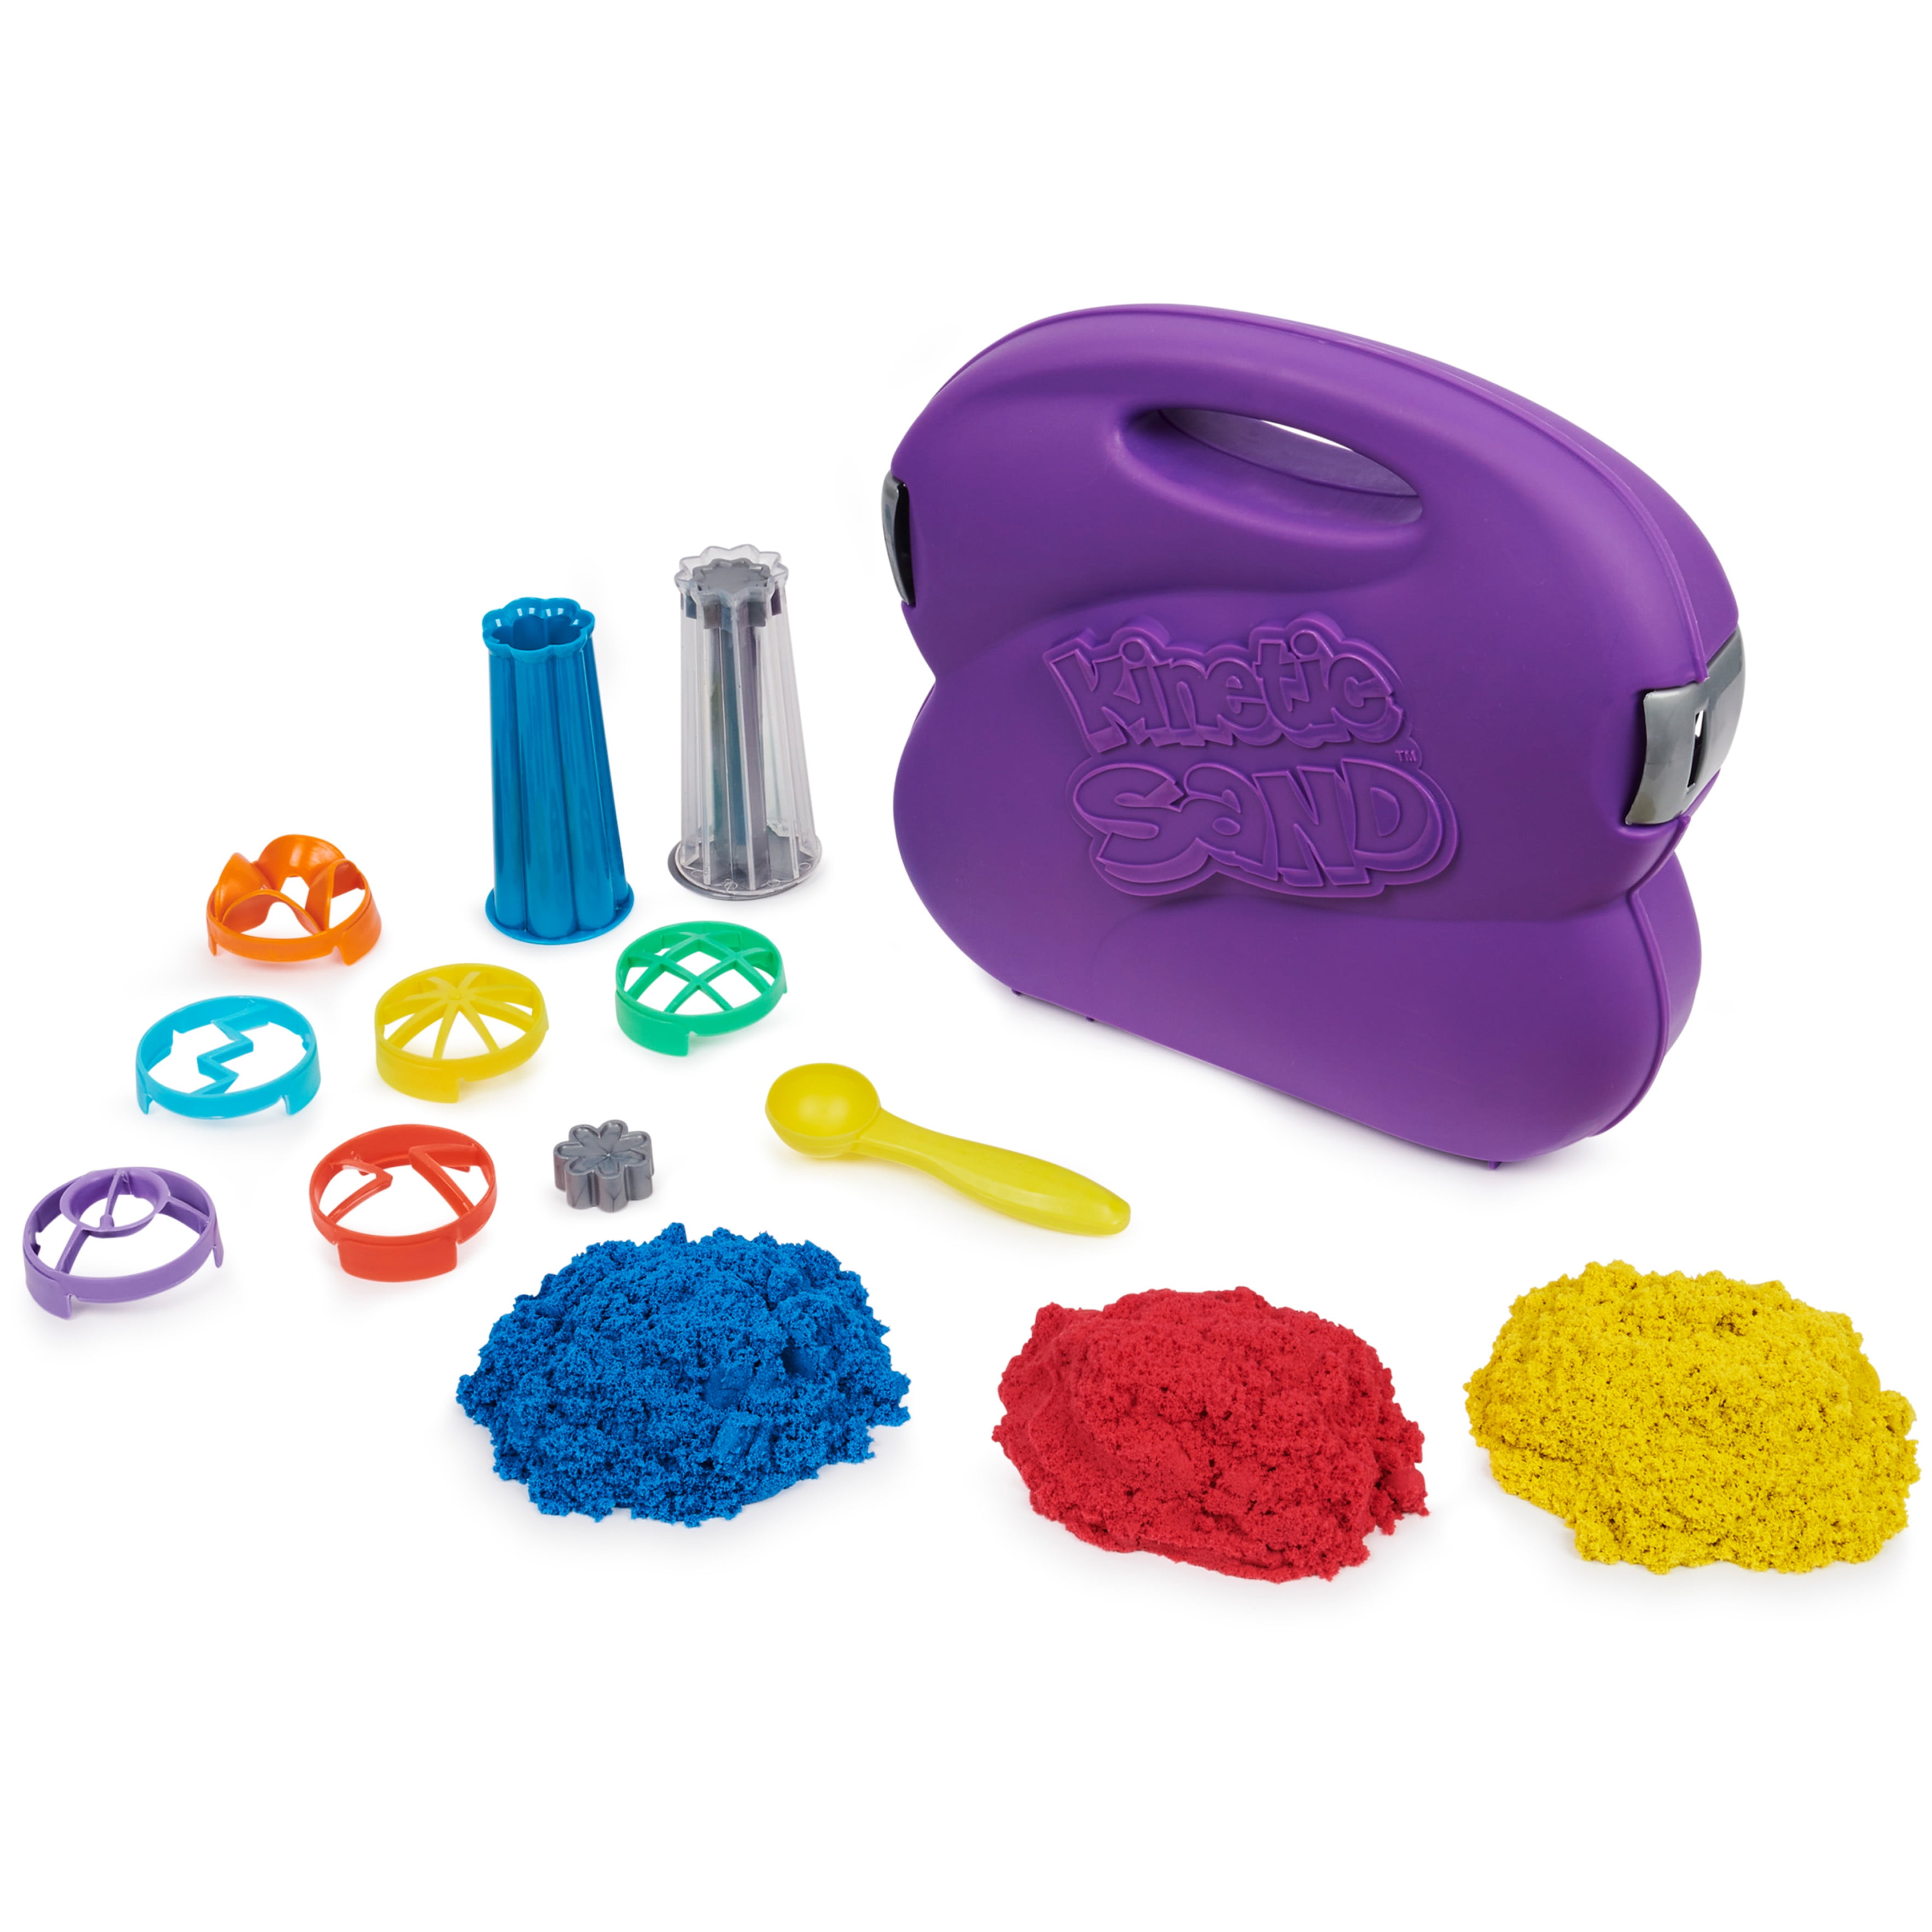 Firsthand Wholesale Kinetic Sand For Kids of All Age Groups 